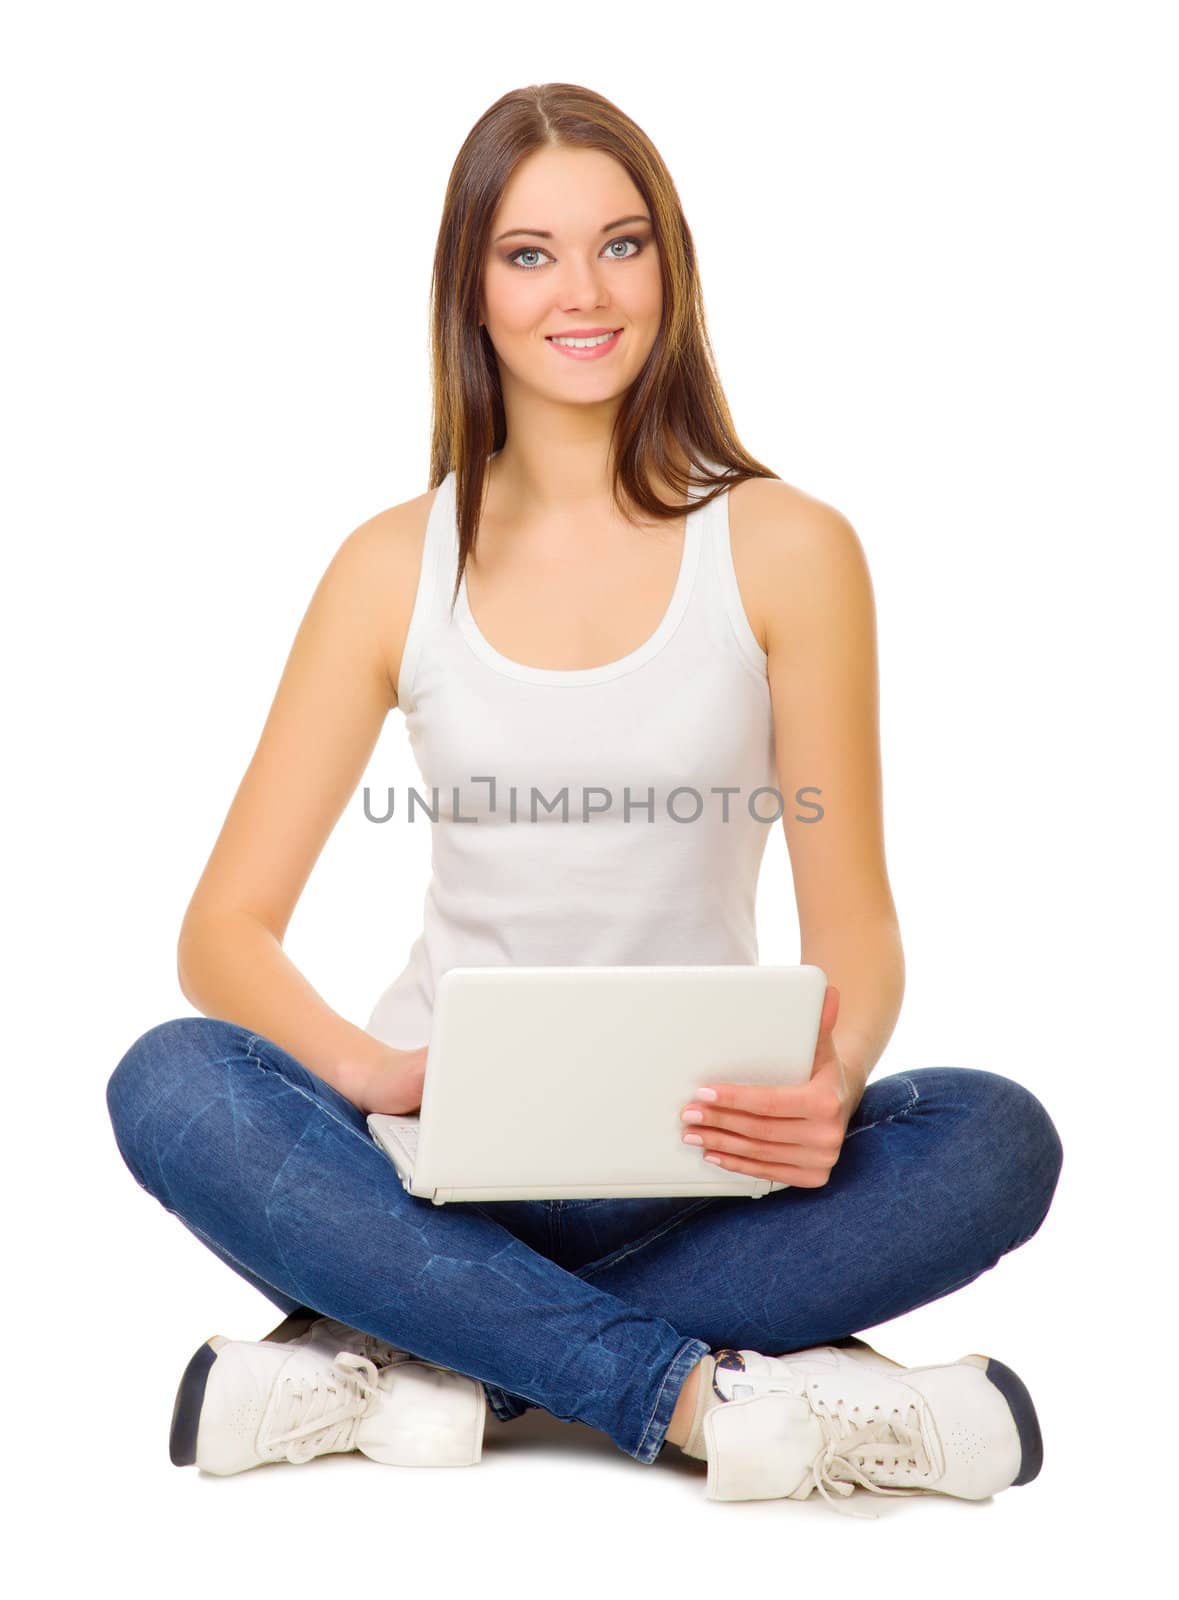 Young smiling girl with laptop by rbv